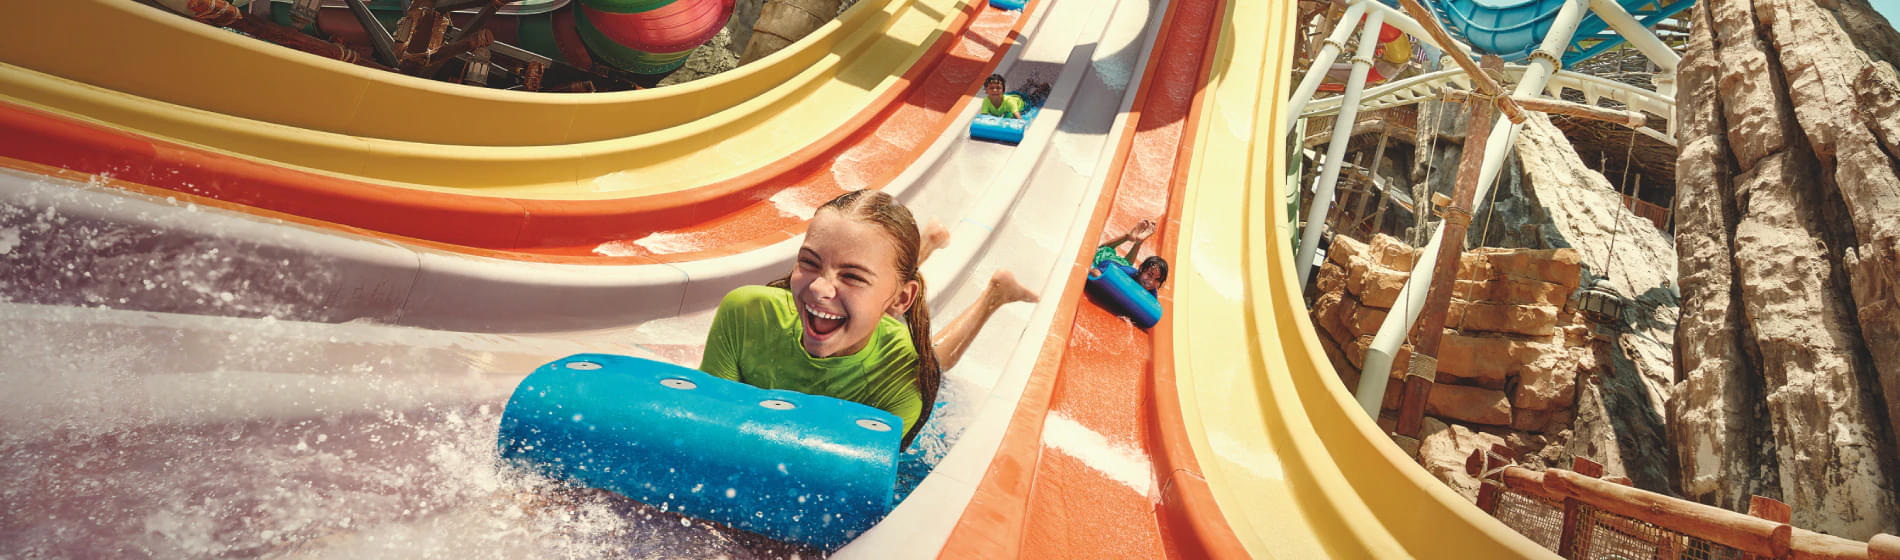 Get ready for an adrenaline-fueled ride as you race down the thrilling water slides at YAS Island water park.